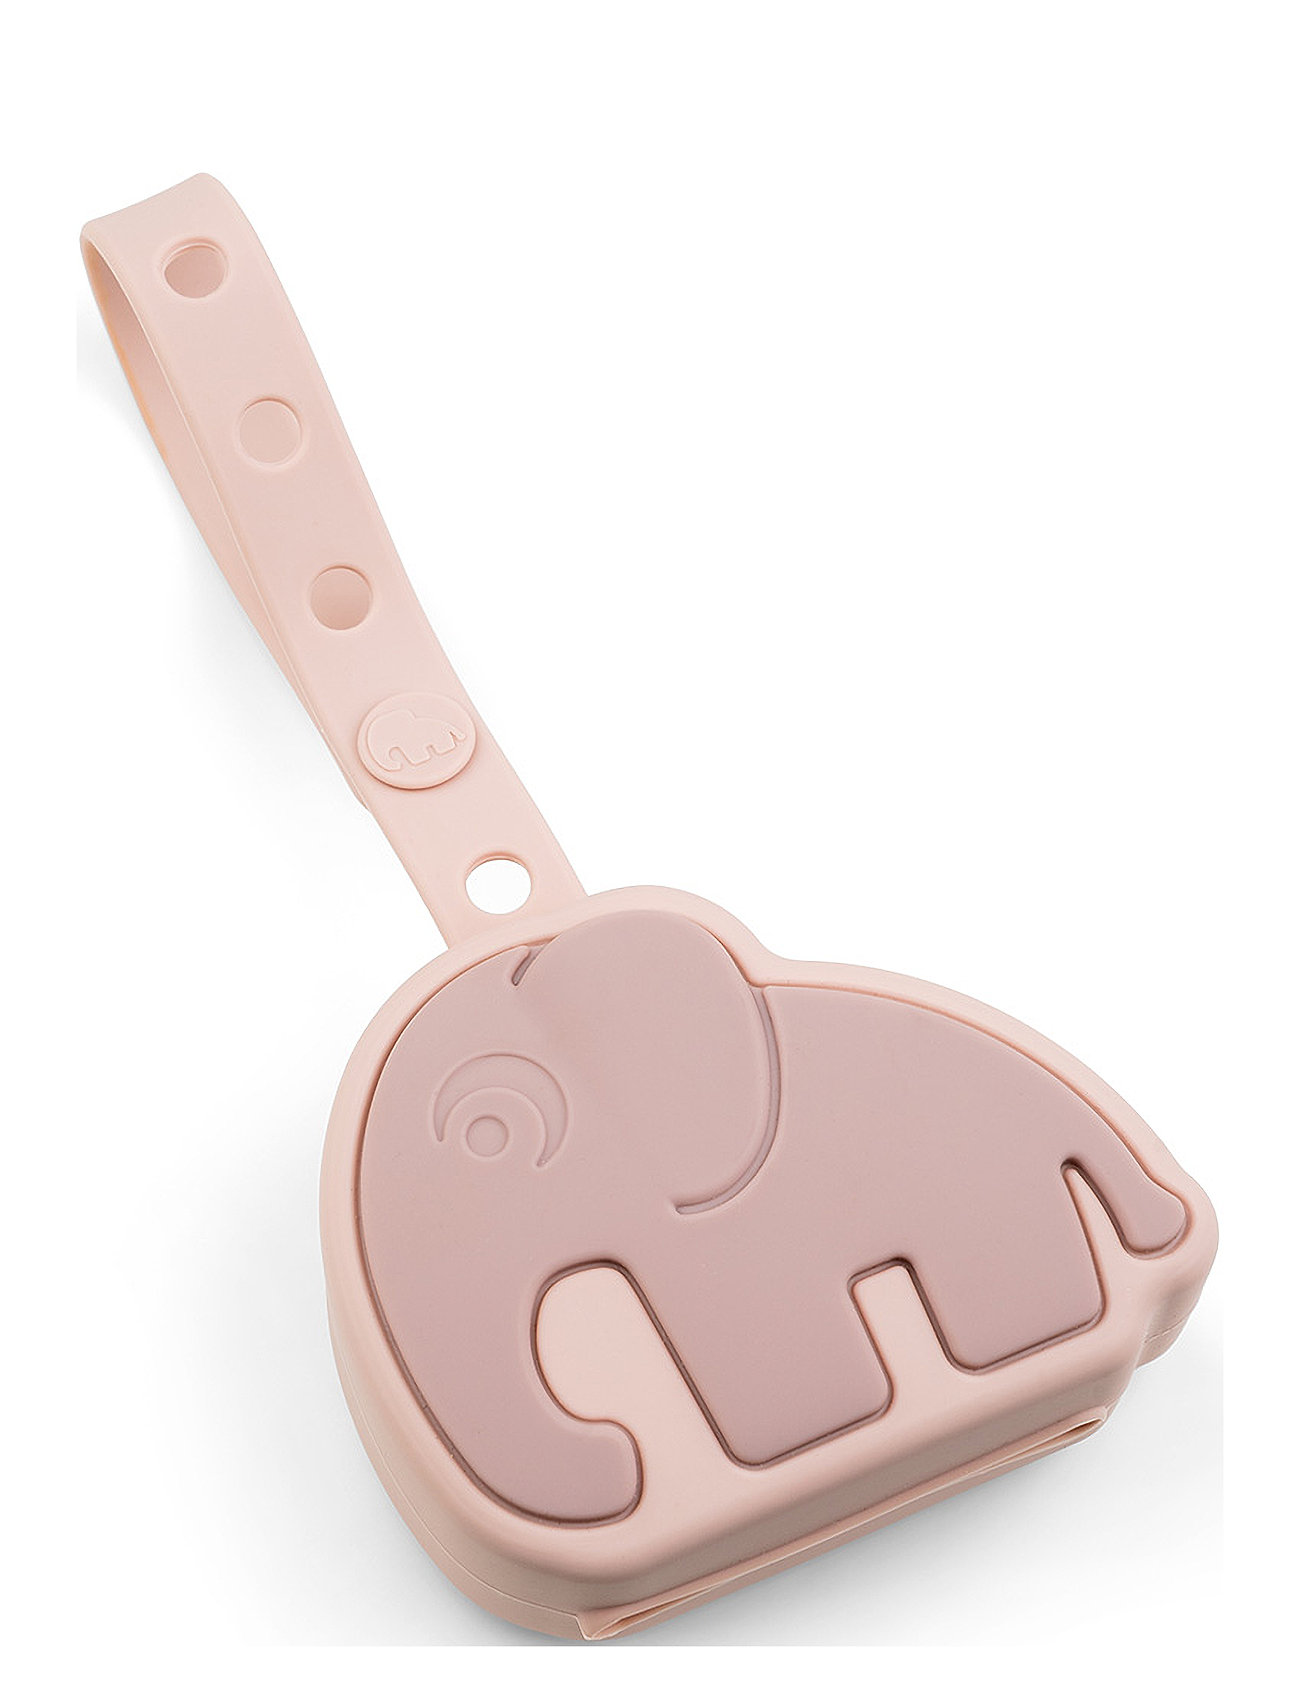 Silik Sutteholder Elphee Pudder Baby & Maternity Pacifiers & Accessories Pacifier Clips Pink D By Deer